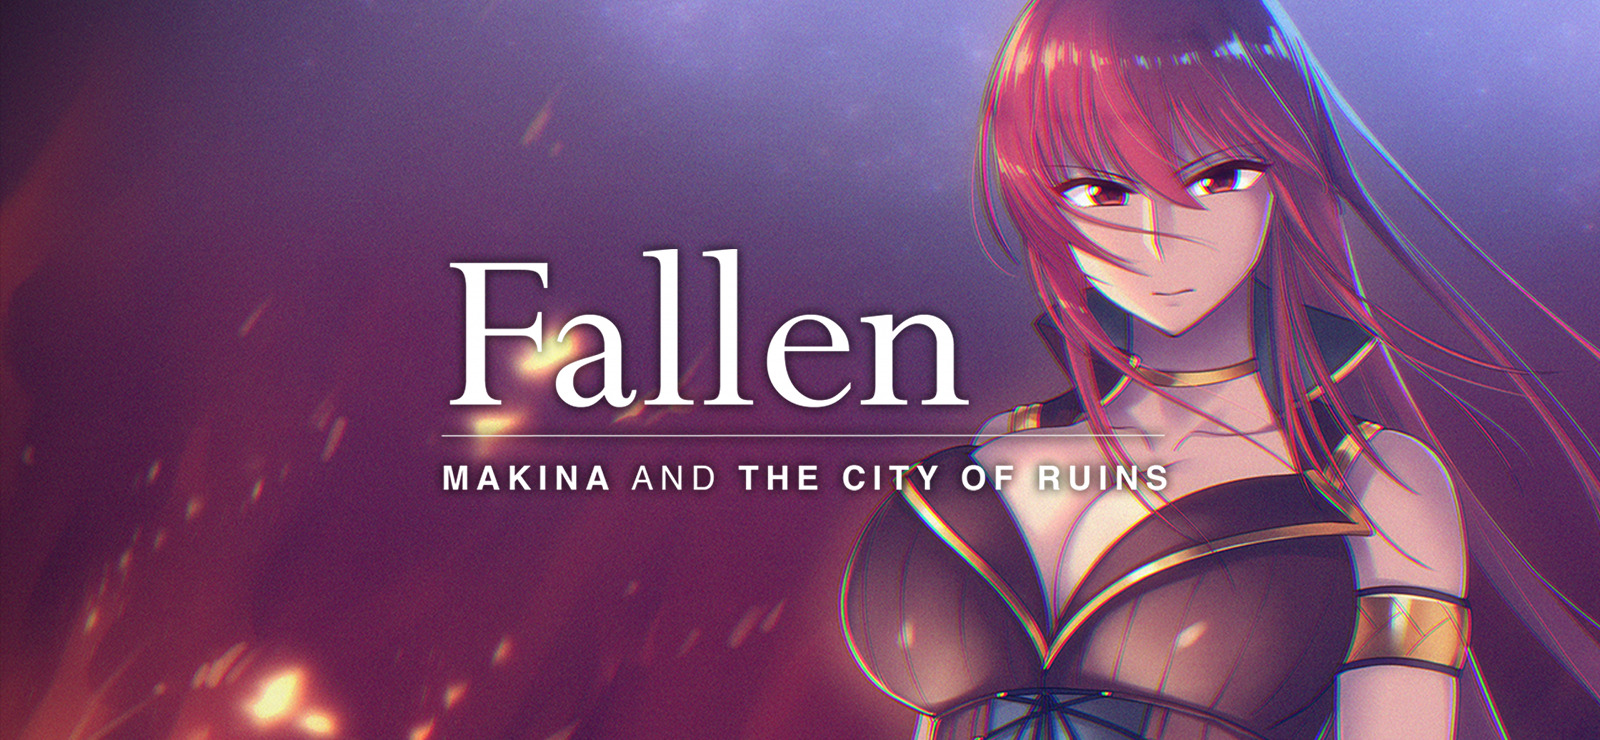 Fallen: makina and the city of ruins